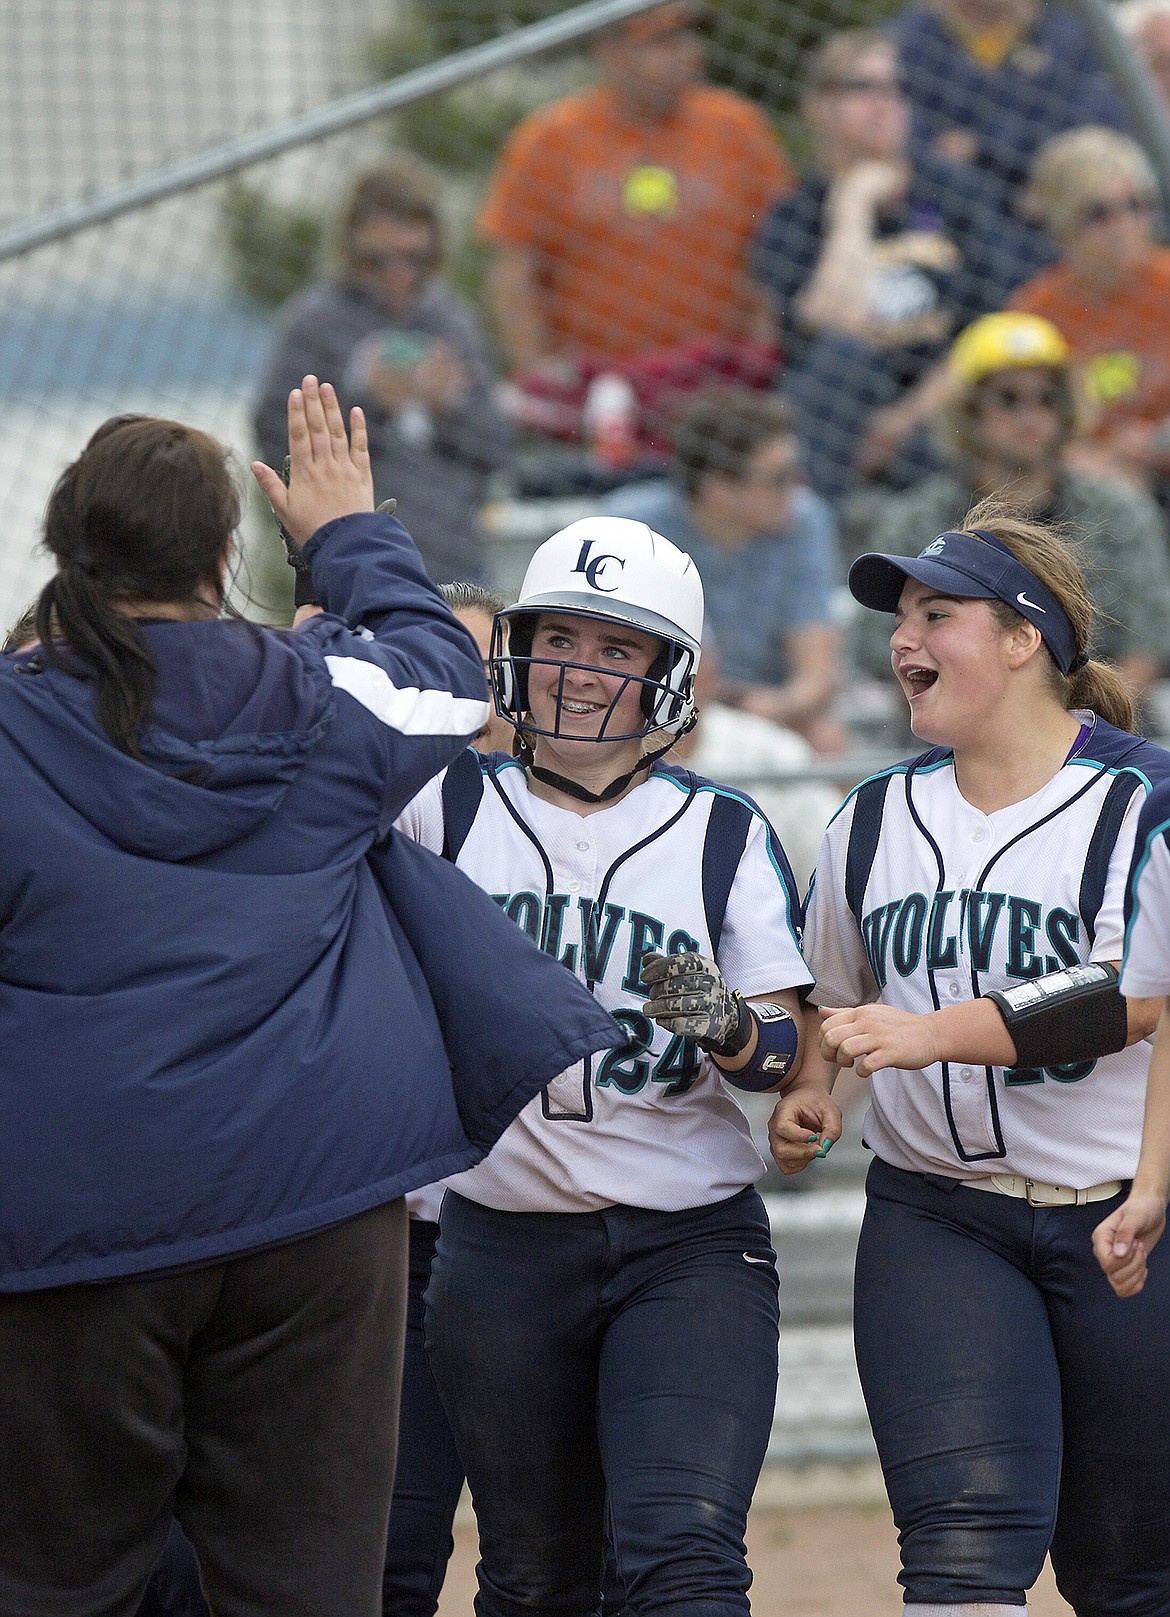 LISA JAMES/Press
ABOVE LEFT: Haley Loffer of Lake City gives assistant coach Amanda Krier a high-five, as Reilly Williams celebrates after Loffer&#146;s home run put them ahead of Meridian 8-2 in the sixth inning during the first game of the state 5A softball tournament Friday at Coeur d&#146;Alene High School.
ABOVE RIGHT: Haley Loffer&#146;s dad, Jeremy Loffer, left, and stepdad, David Hunt, fist bump each other after Loffer&#146;s home run.